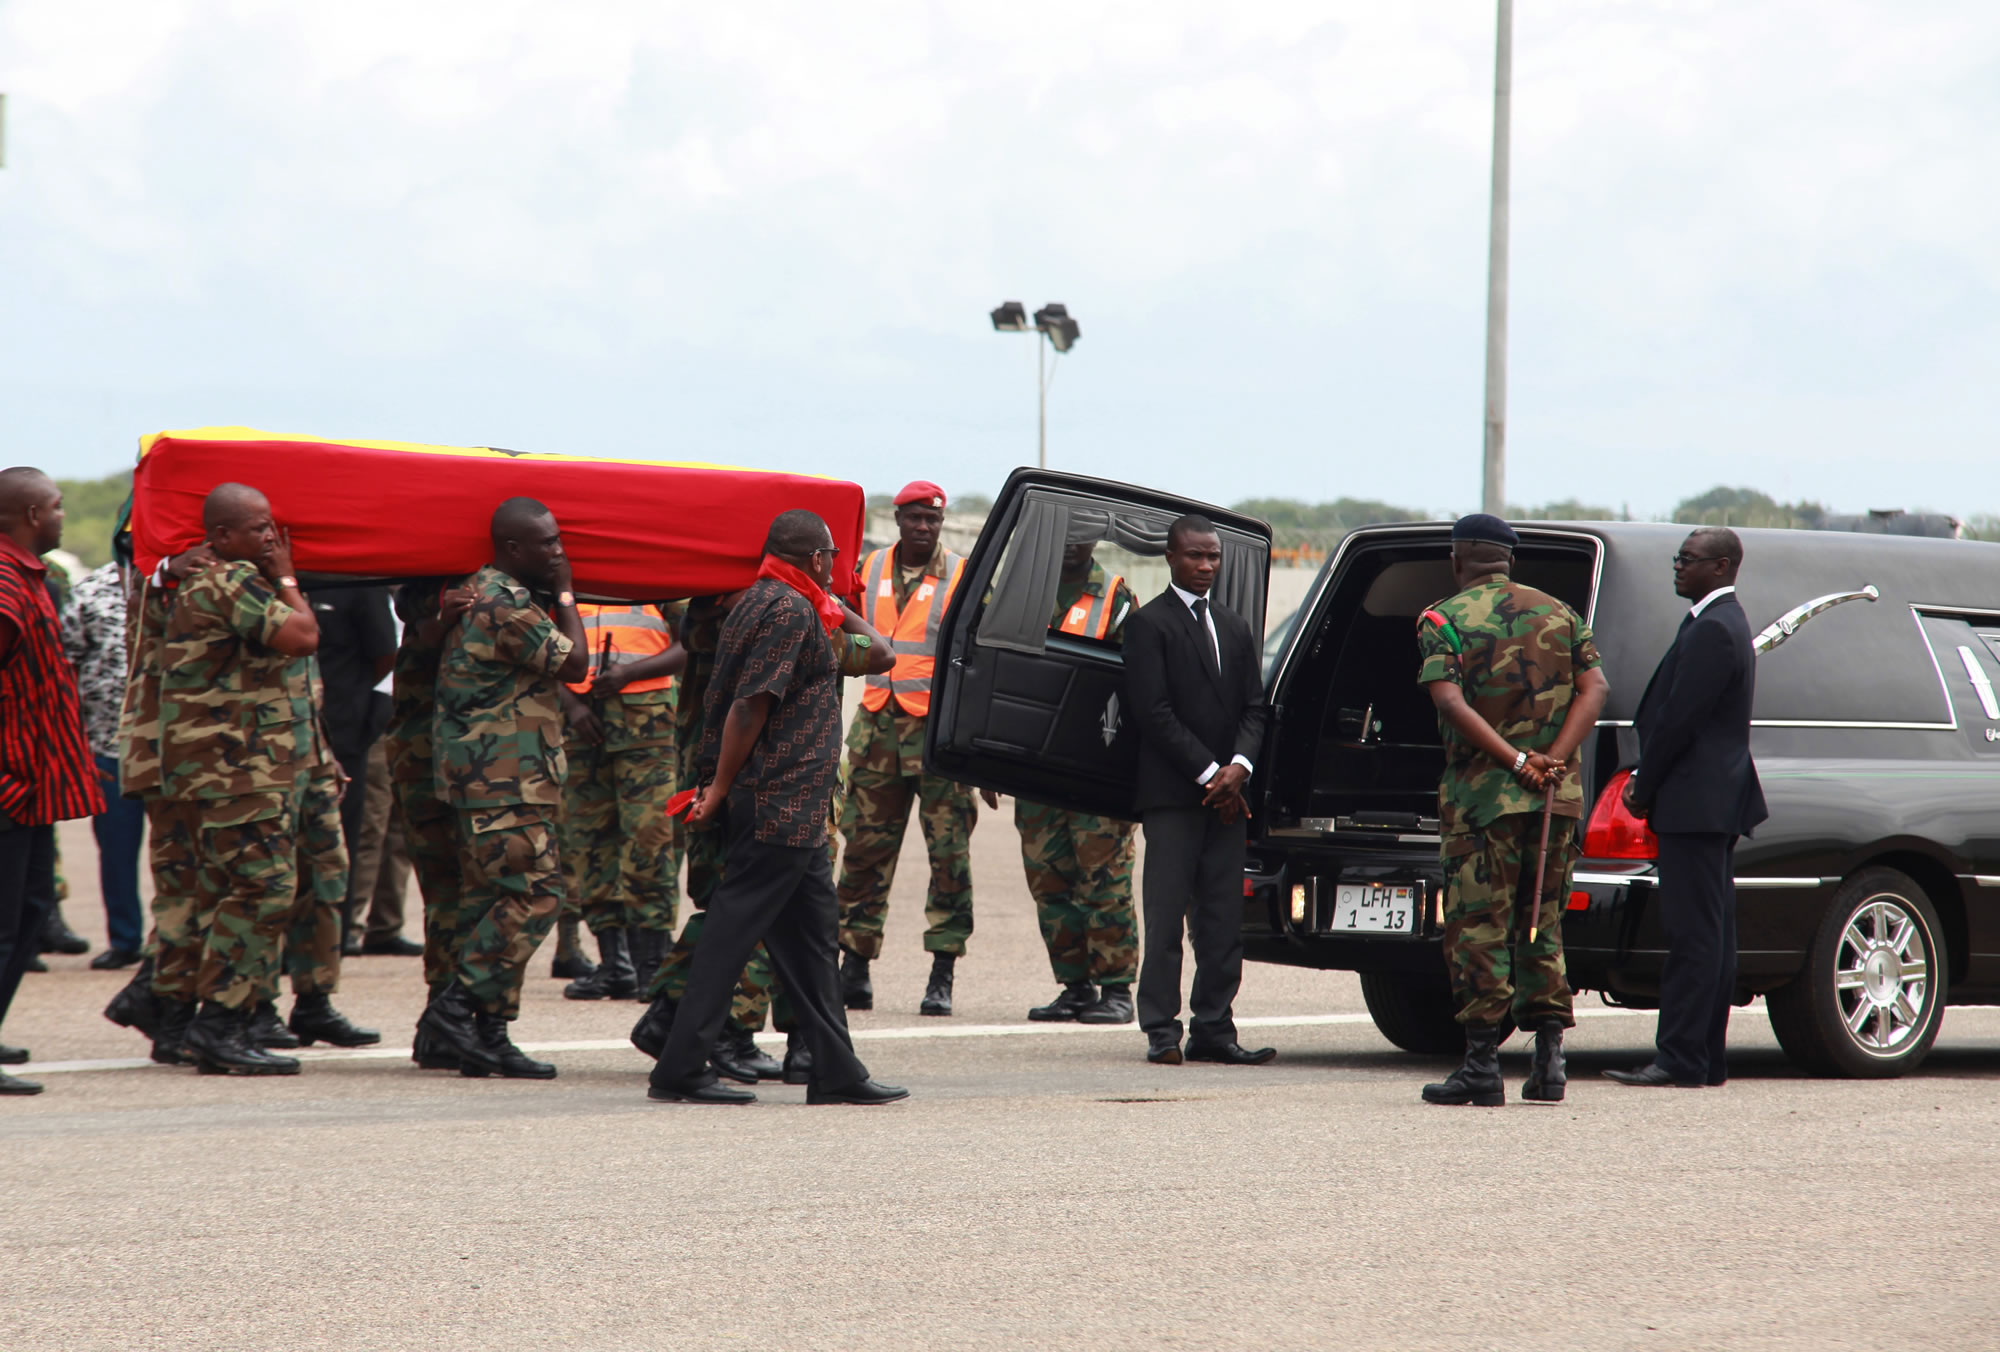 Ghanaian soldiers carry the flag draped coffin of celebrated poet, professor and ambassador Kofi Awoonor after his body was flown back from Kenya, at the airport in Accra, Ghana, on Wednesday. Mourners sang funeral dirges and traditional leaders poured libations Wednesday for the beloved literary icon, as hundreds gathered at the airport where his body was brought home days after he was slain in the Kenya mall terror attack.